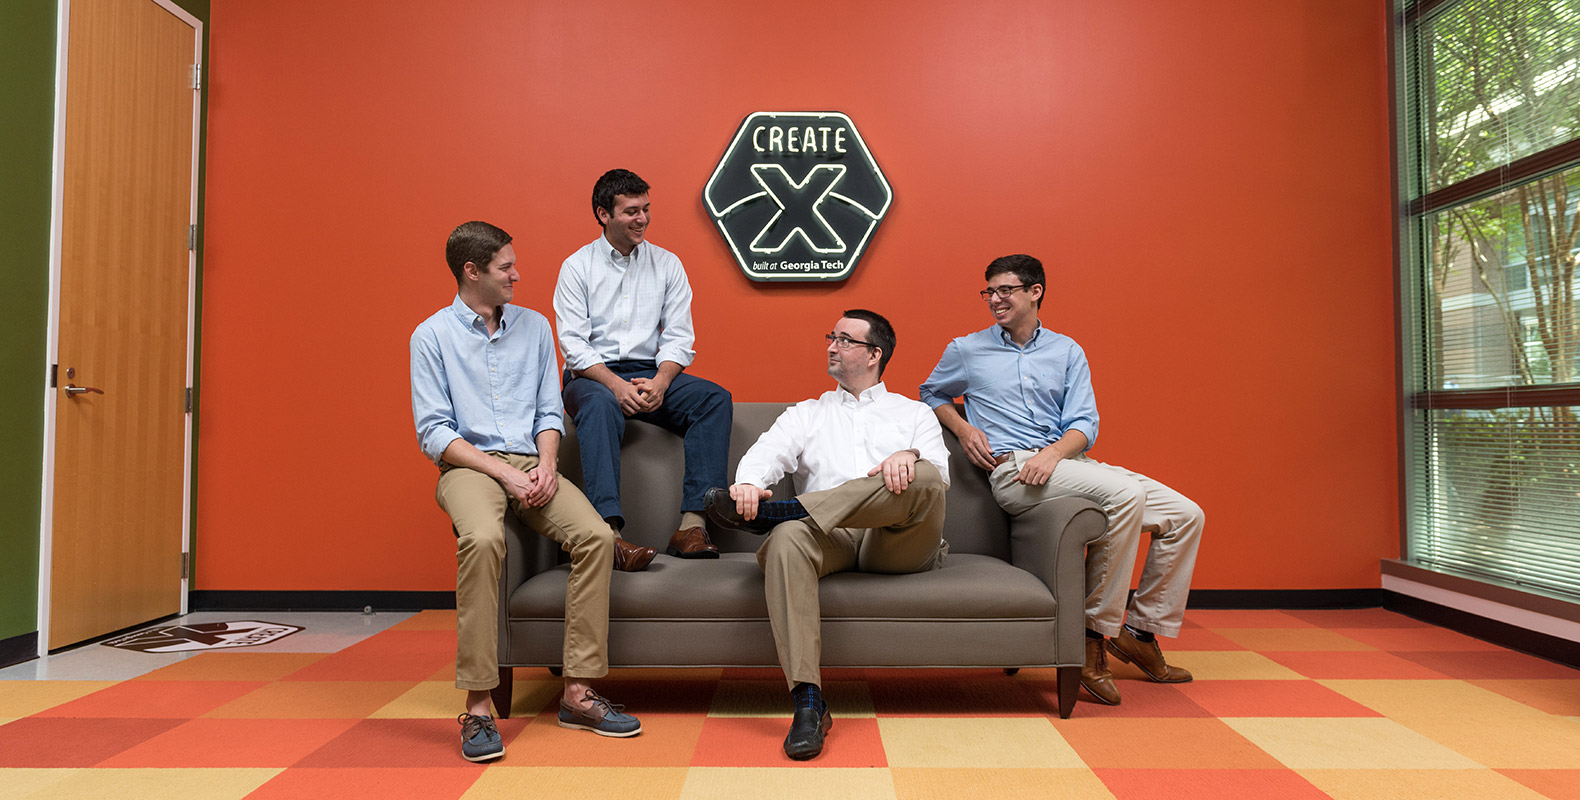 Portrait of the four TEQ charging members sitting on a couch under a black-and-white Create-X neon sign on an orange wall